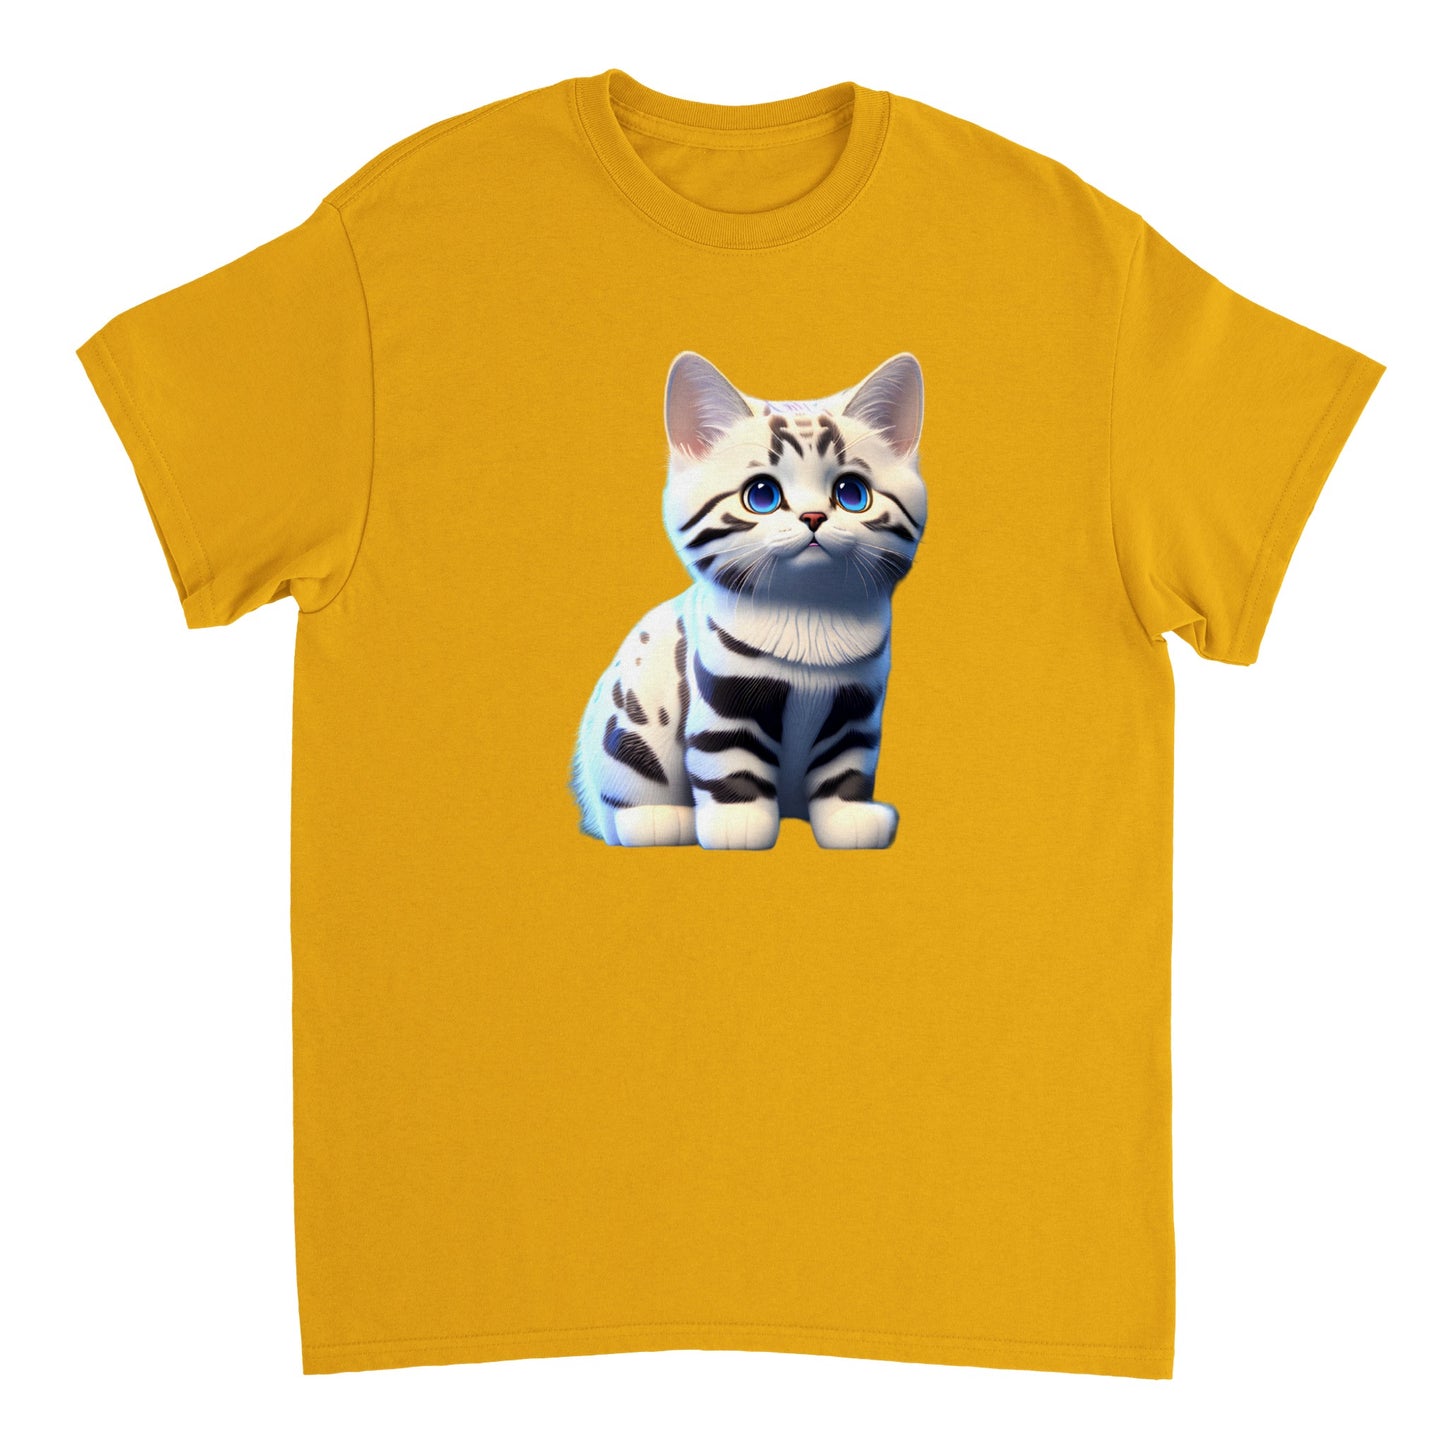 Adorable, Cool, Cute Cats and Kittens Toy - Heavyweight Unisex Crewneck T-shirt 46